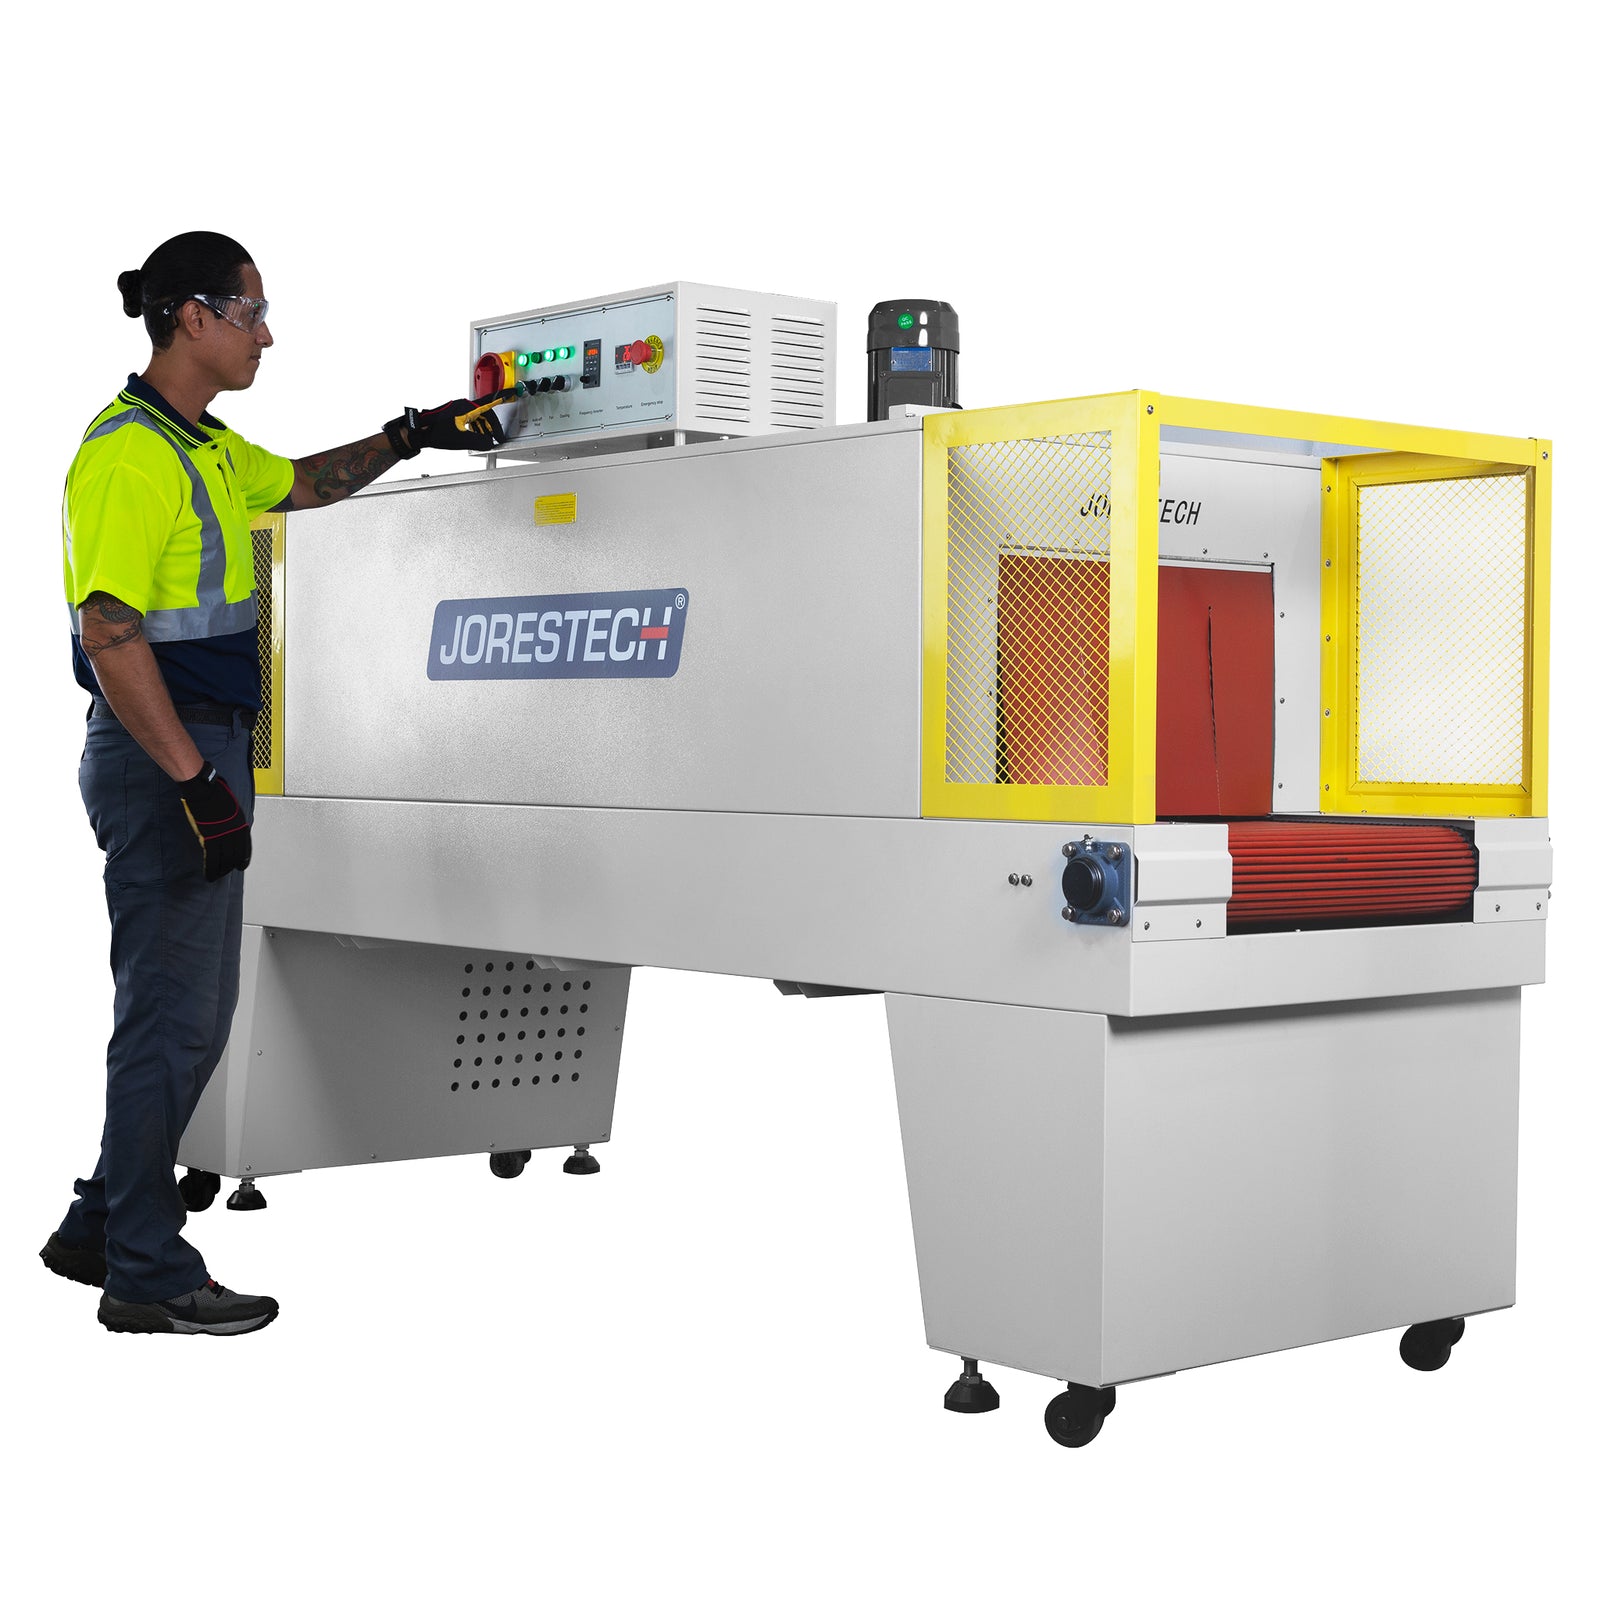 JORESTECH heat shrinking tunnel being operated by a man wearing a high visibility yellow shirt and high-impact safety glasses over a white background. He is pressing a button on the machine's control panel to stablish the conveyor's speed and temperature need in the tunnel. Three green lights on the control panel are lit up, machine is almost ready to start shrinking products.